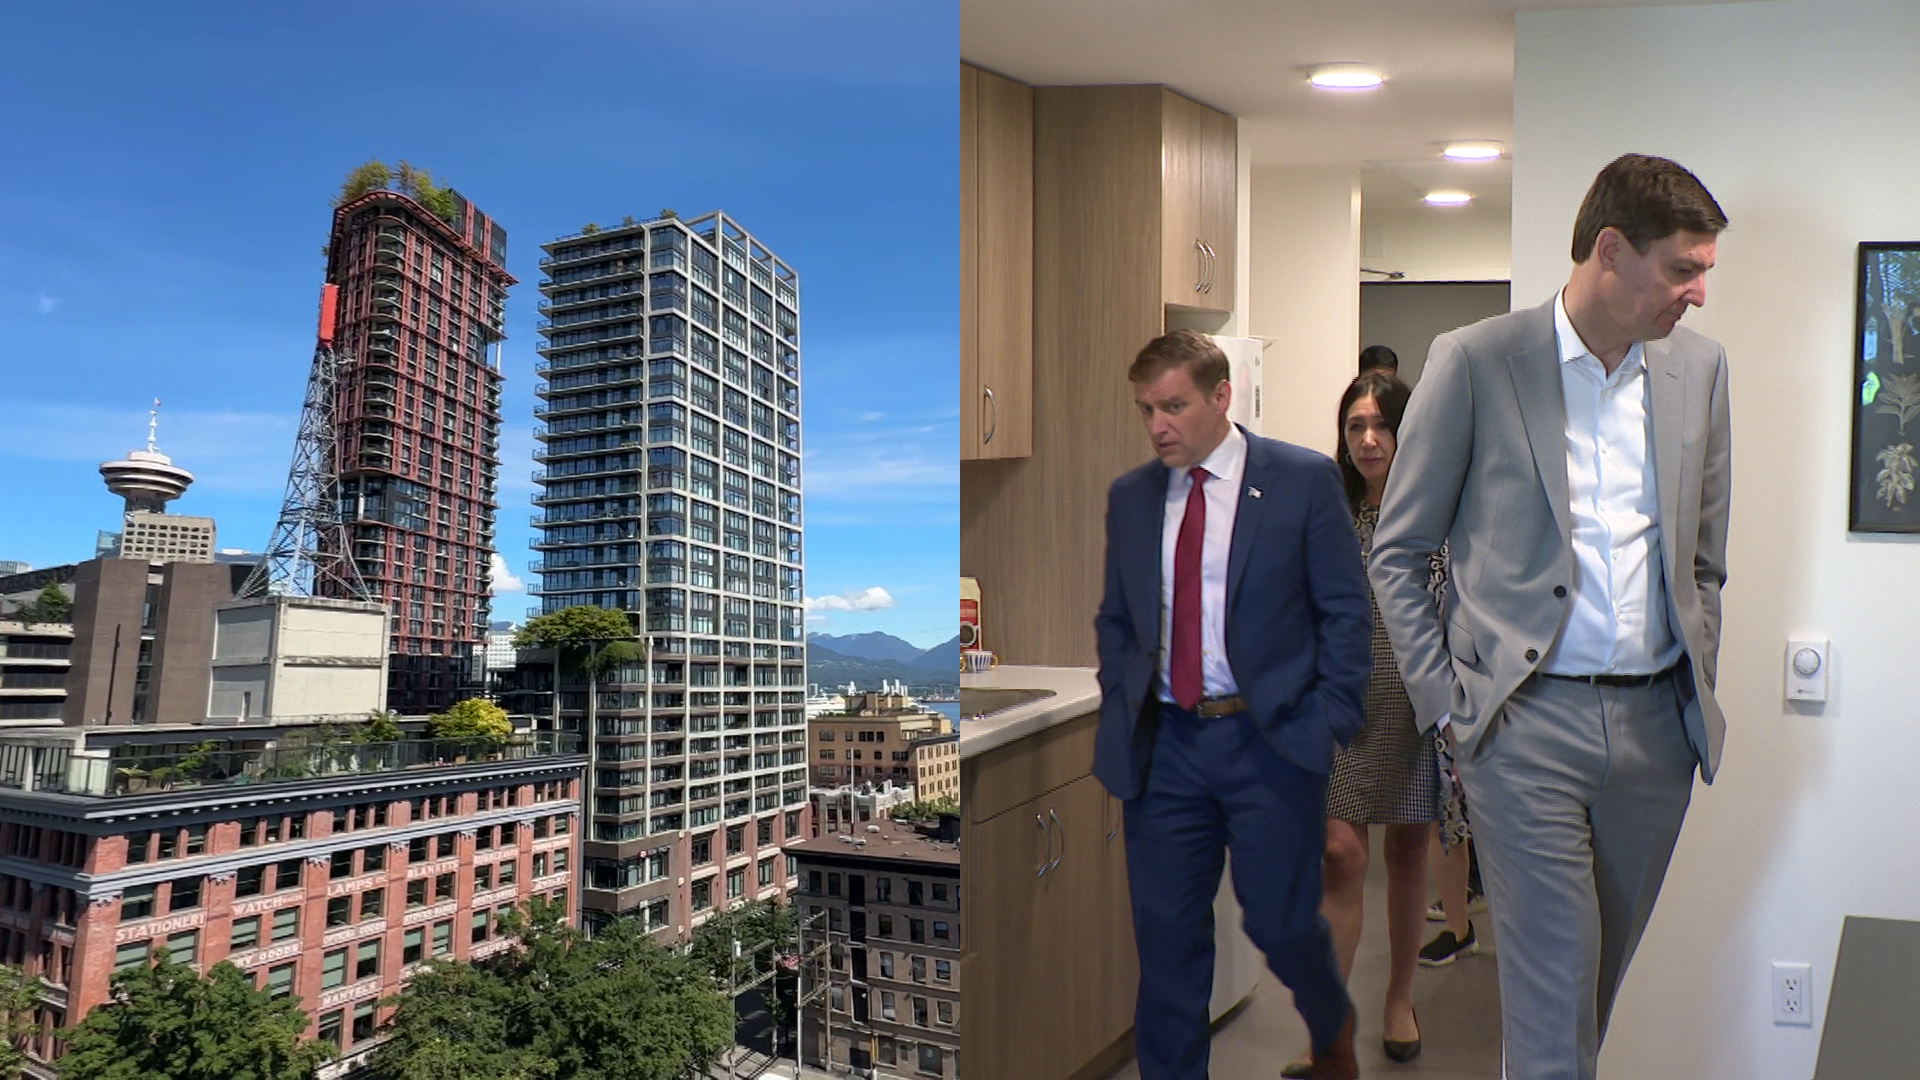 Largest social housing project in Downtown Eastside set to open